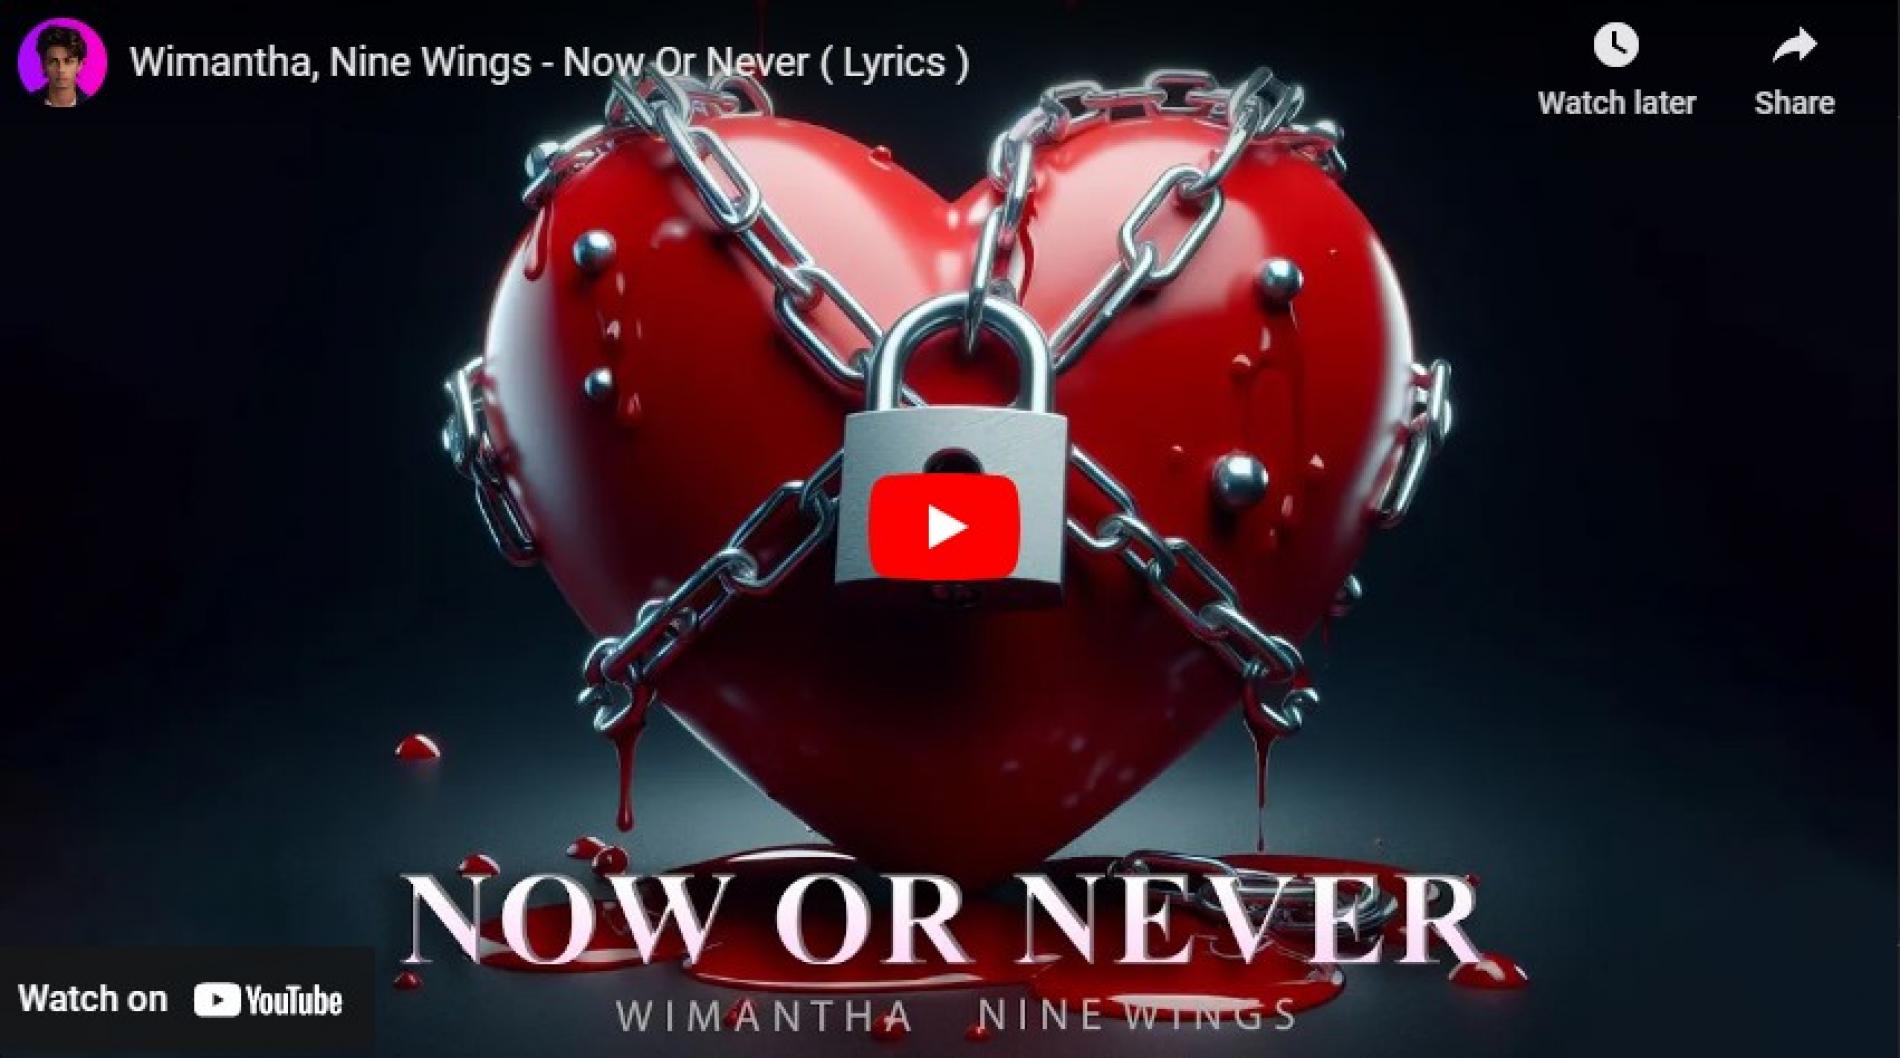 New Music : Wimantha, Nine Wings – Now Or Never (Lyrics)